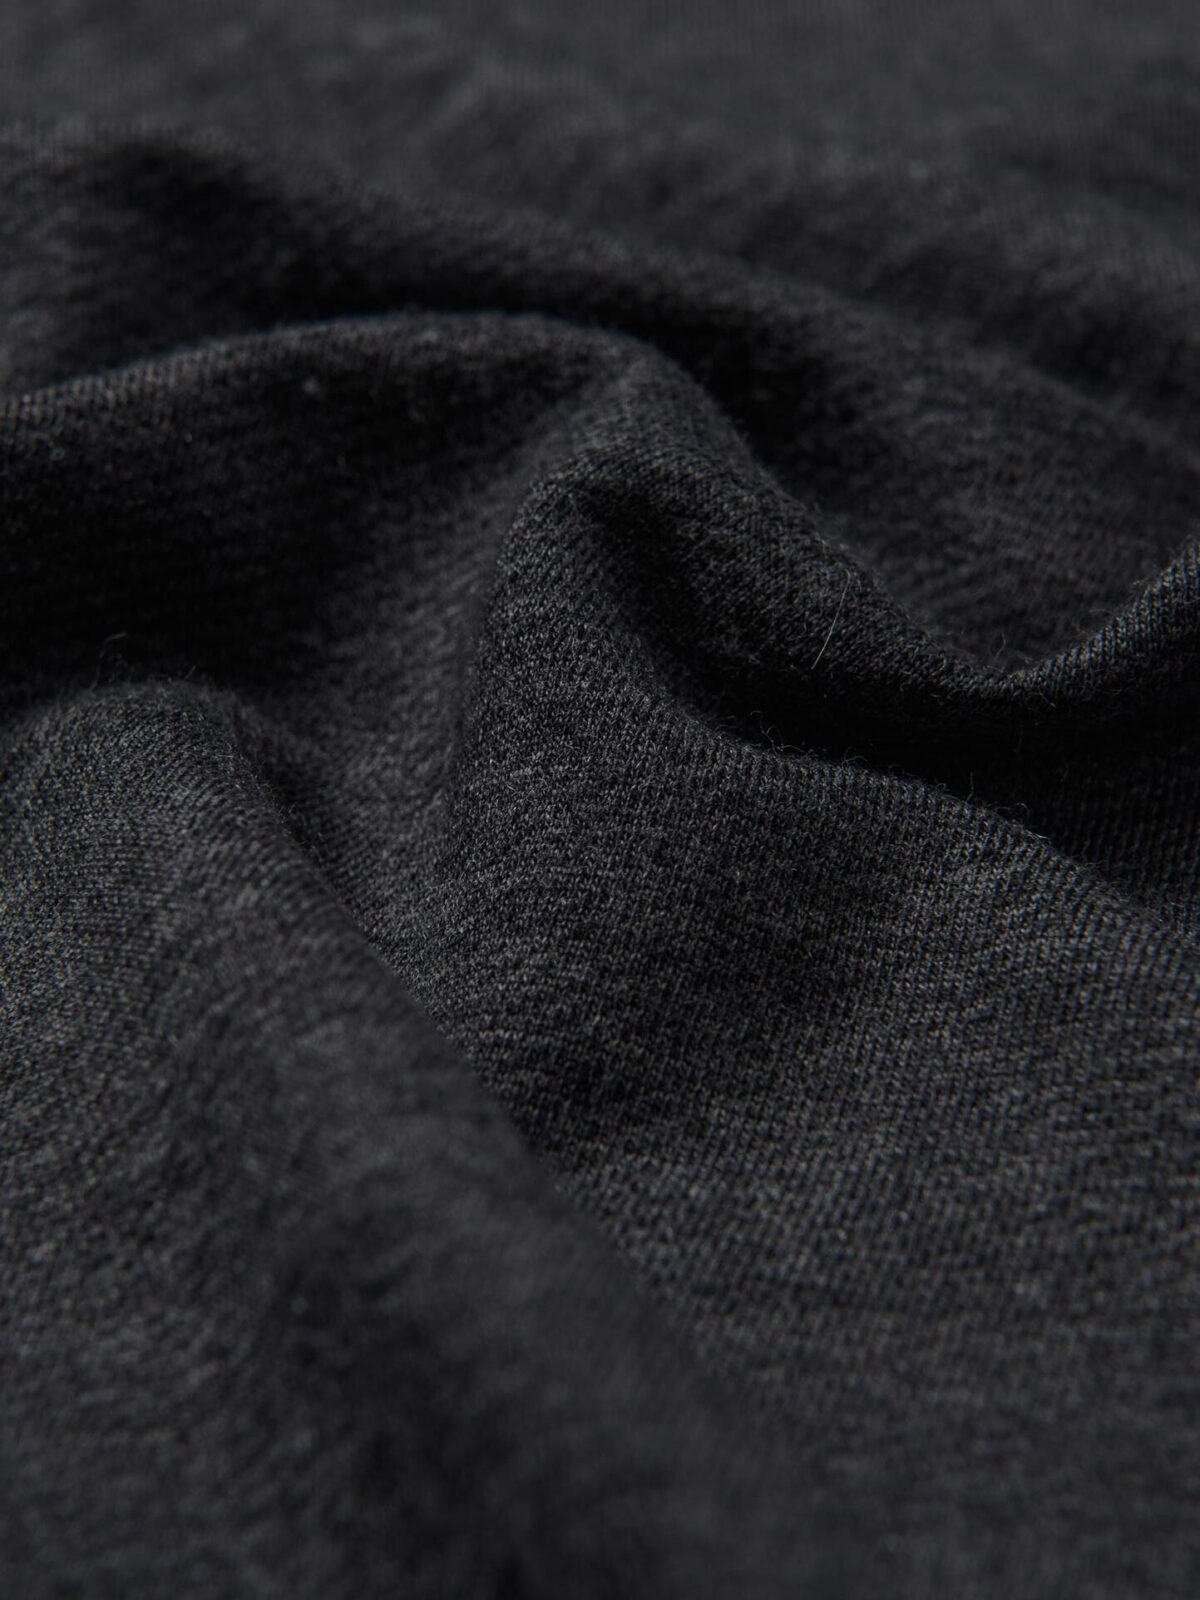 Charcoal Melange Wool and Cotton Knit Shirts by Proper Cloth